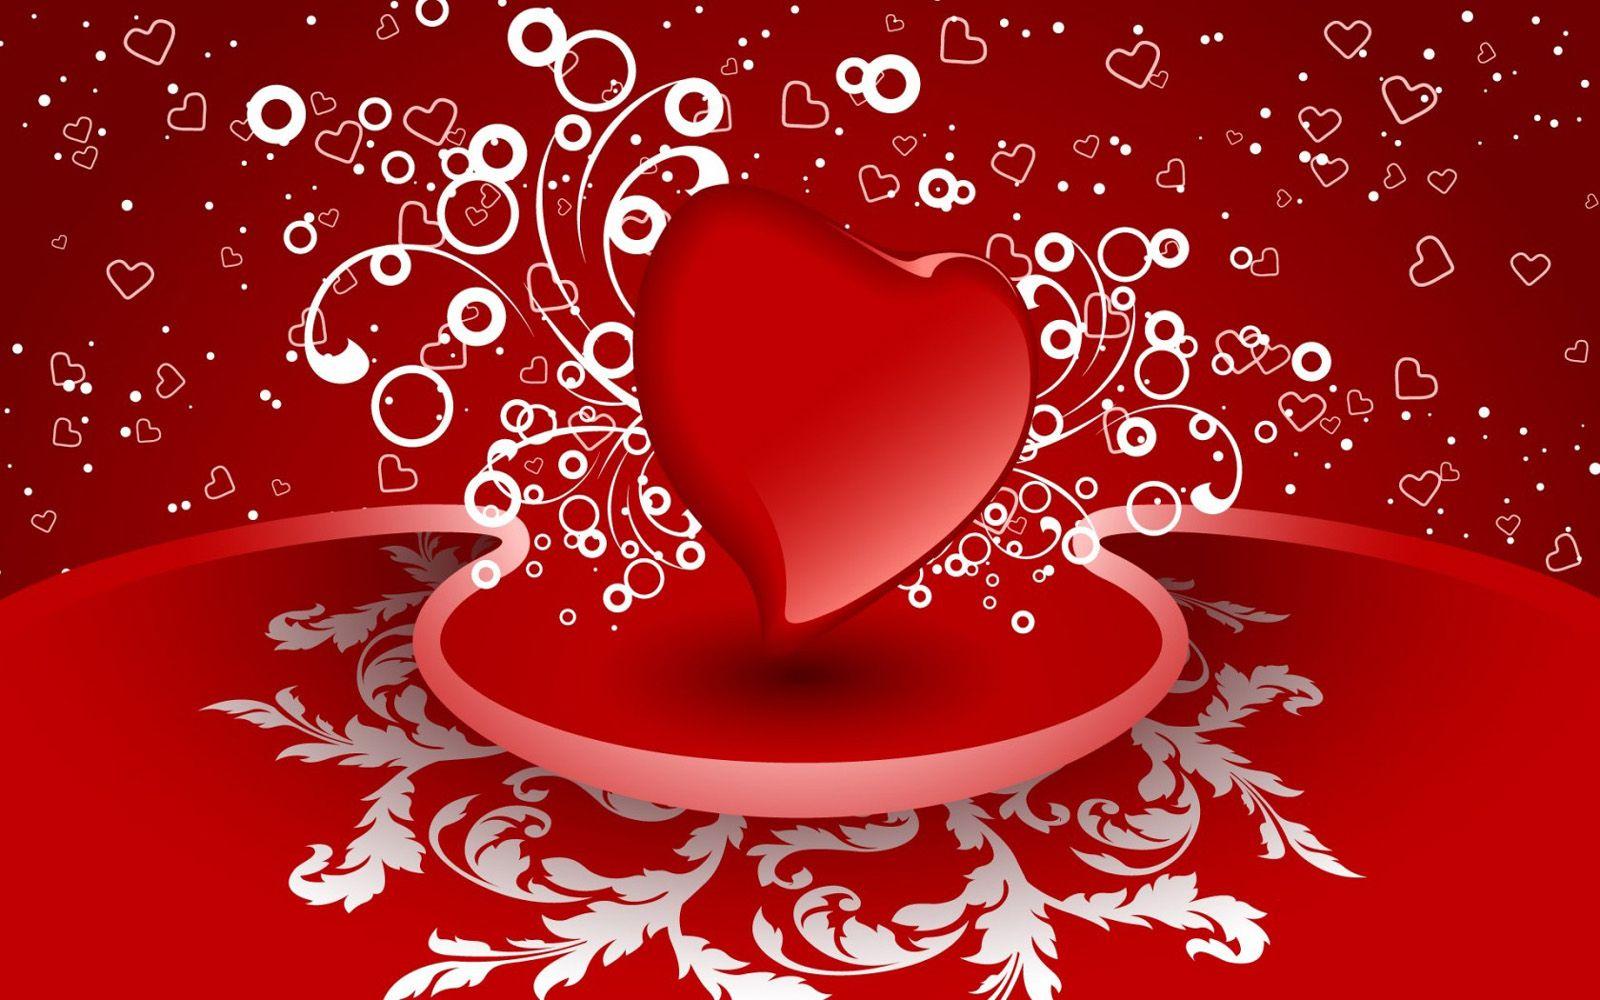 30 Beautiful Valentines Day Wallpapers for your desktop